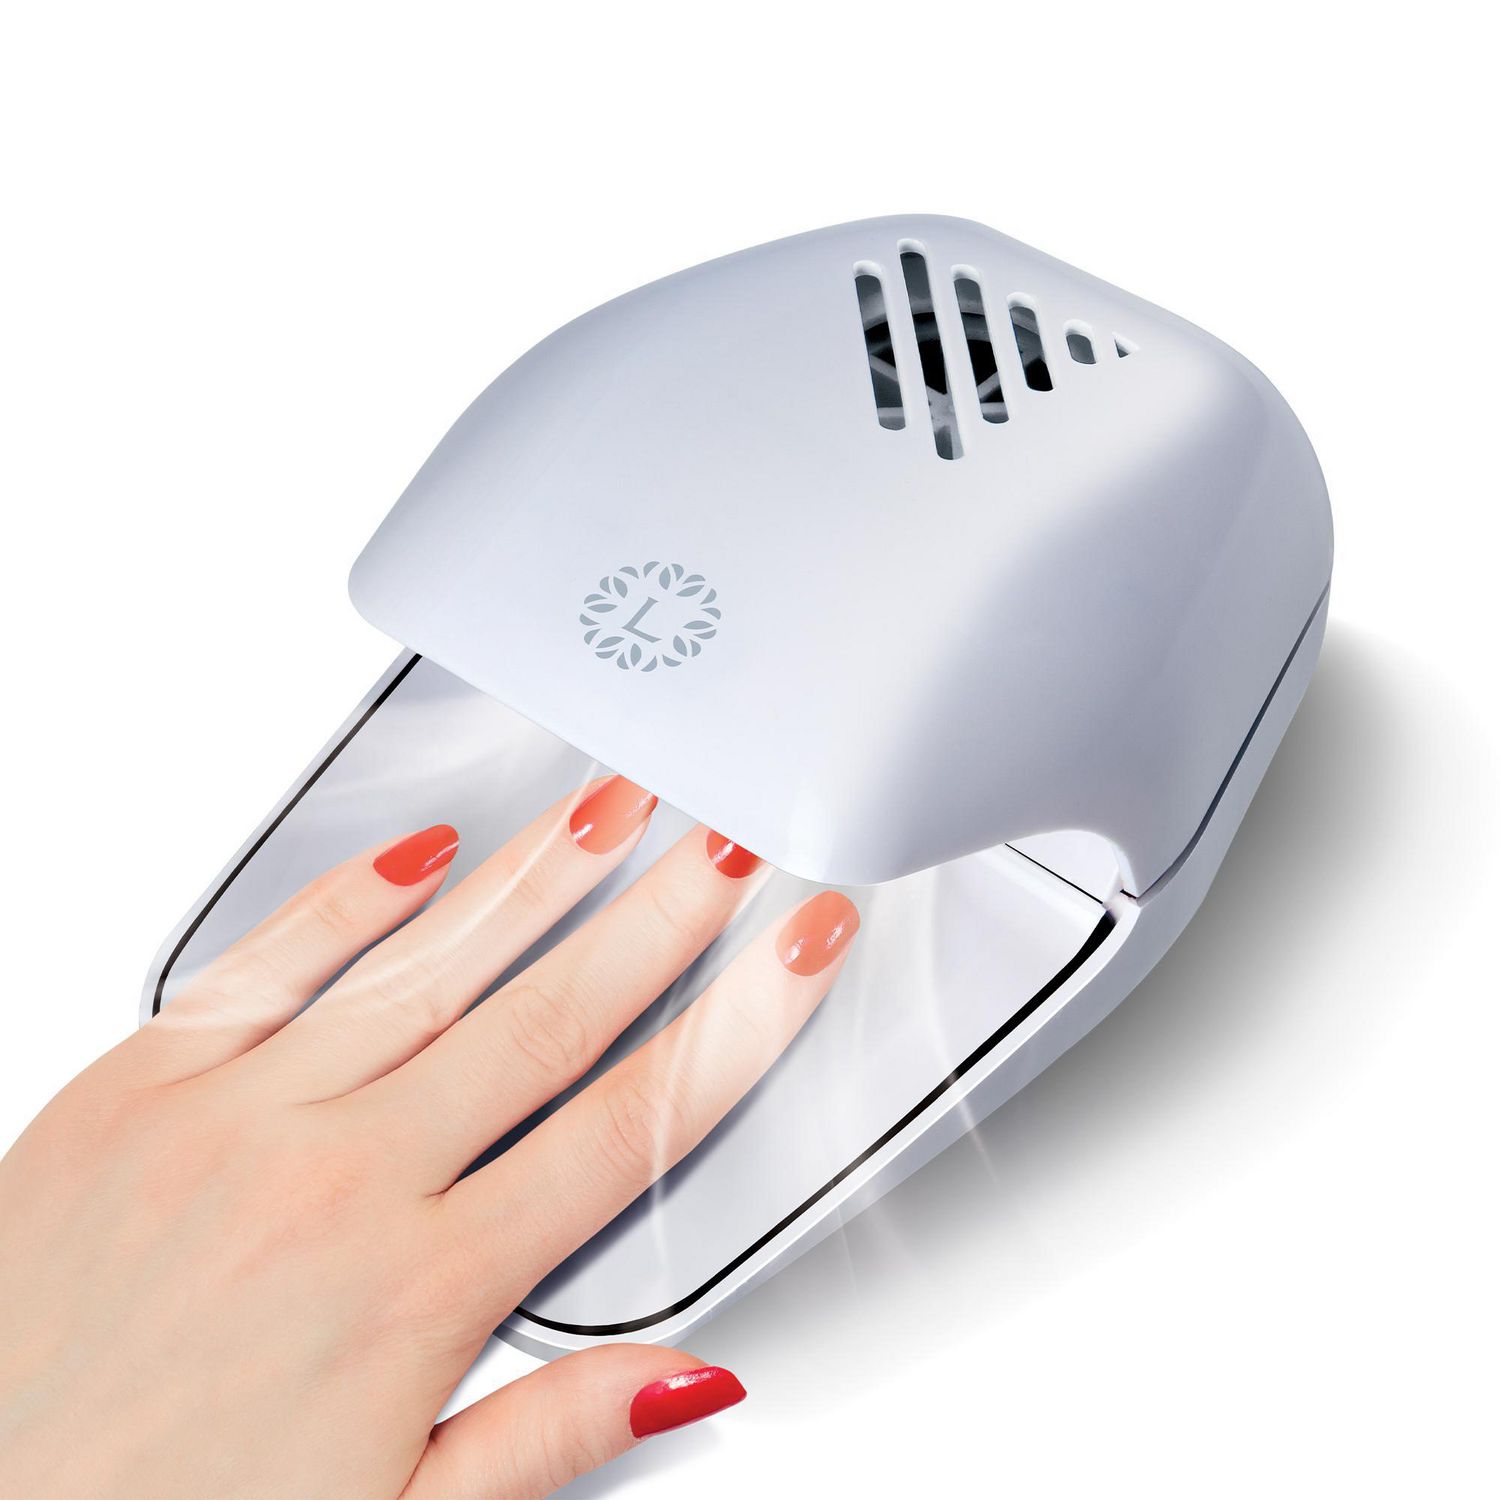 Buy Online Onetech Mini Nail Dryer Fan Dr-300 at best price in UAE- nazih.ae